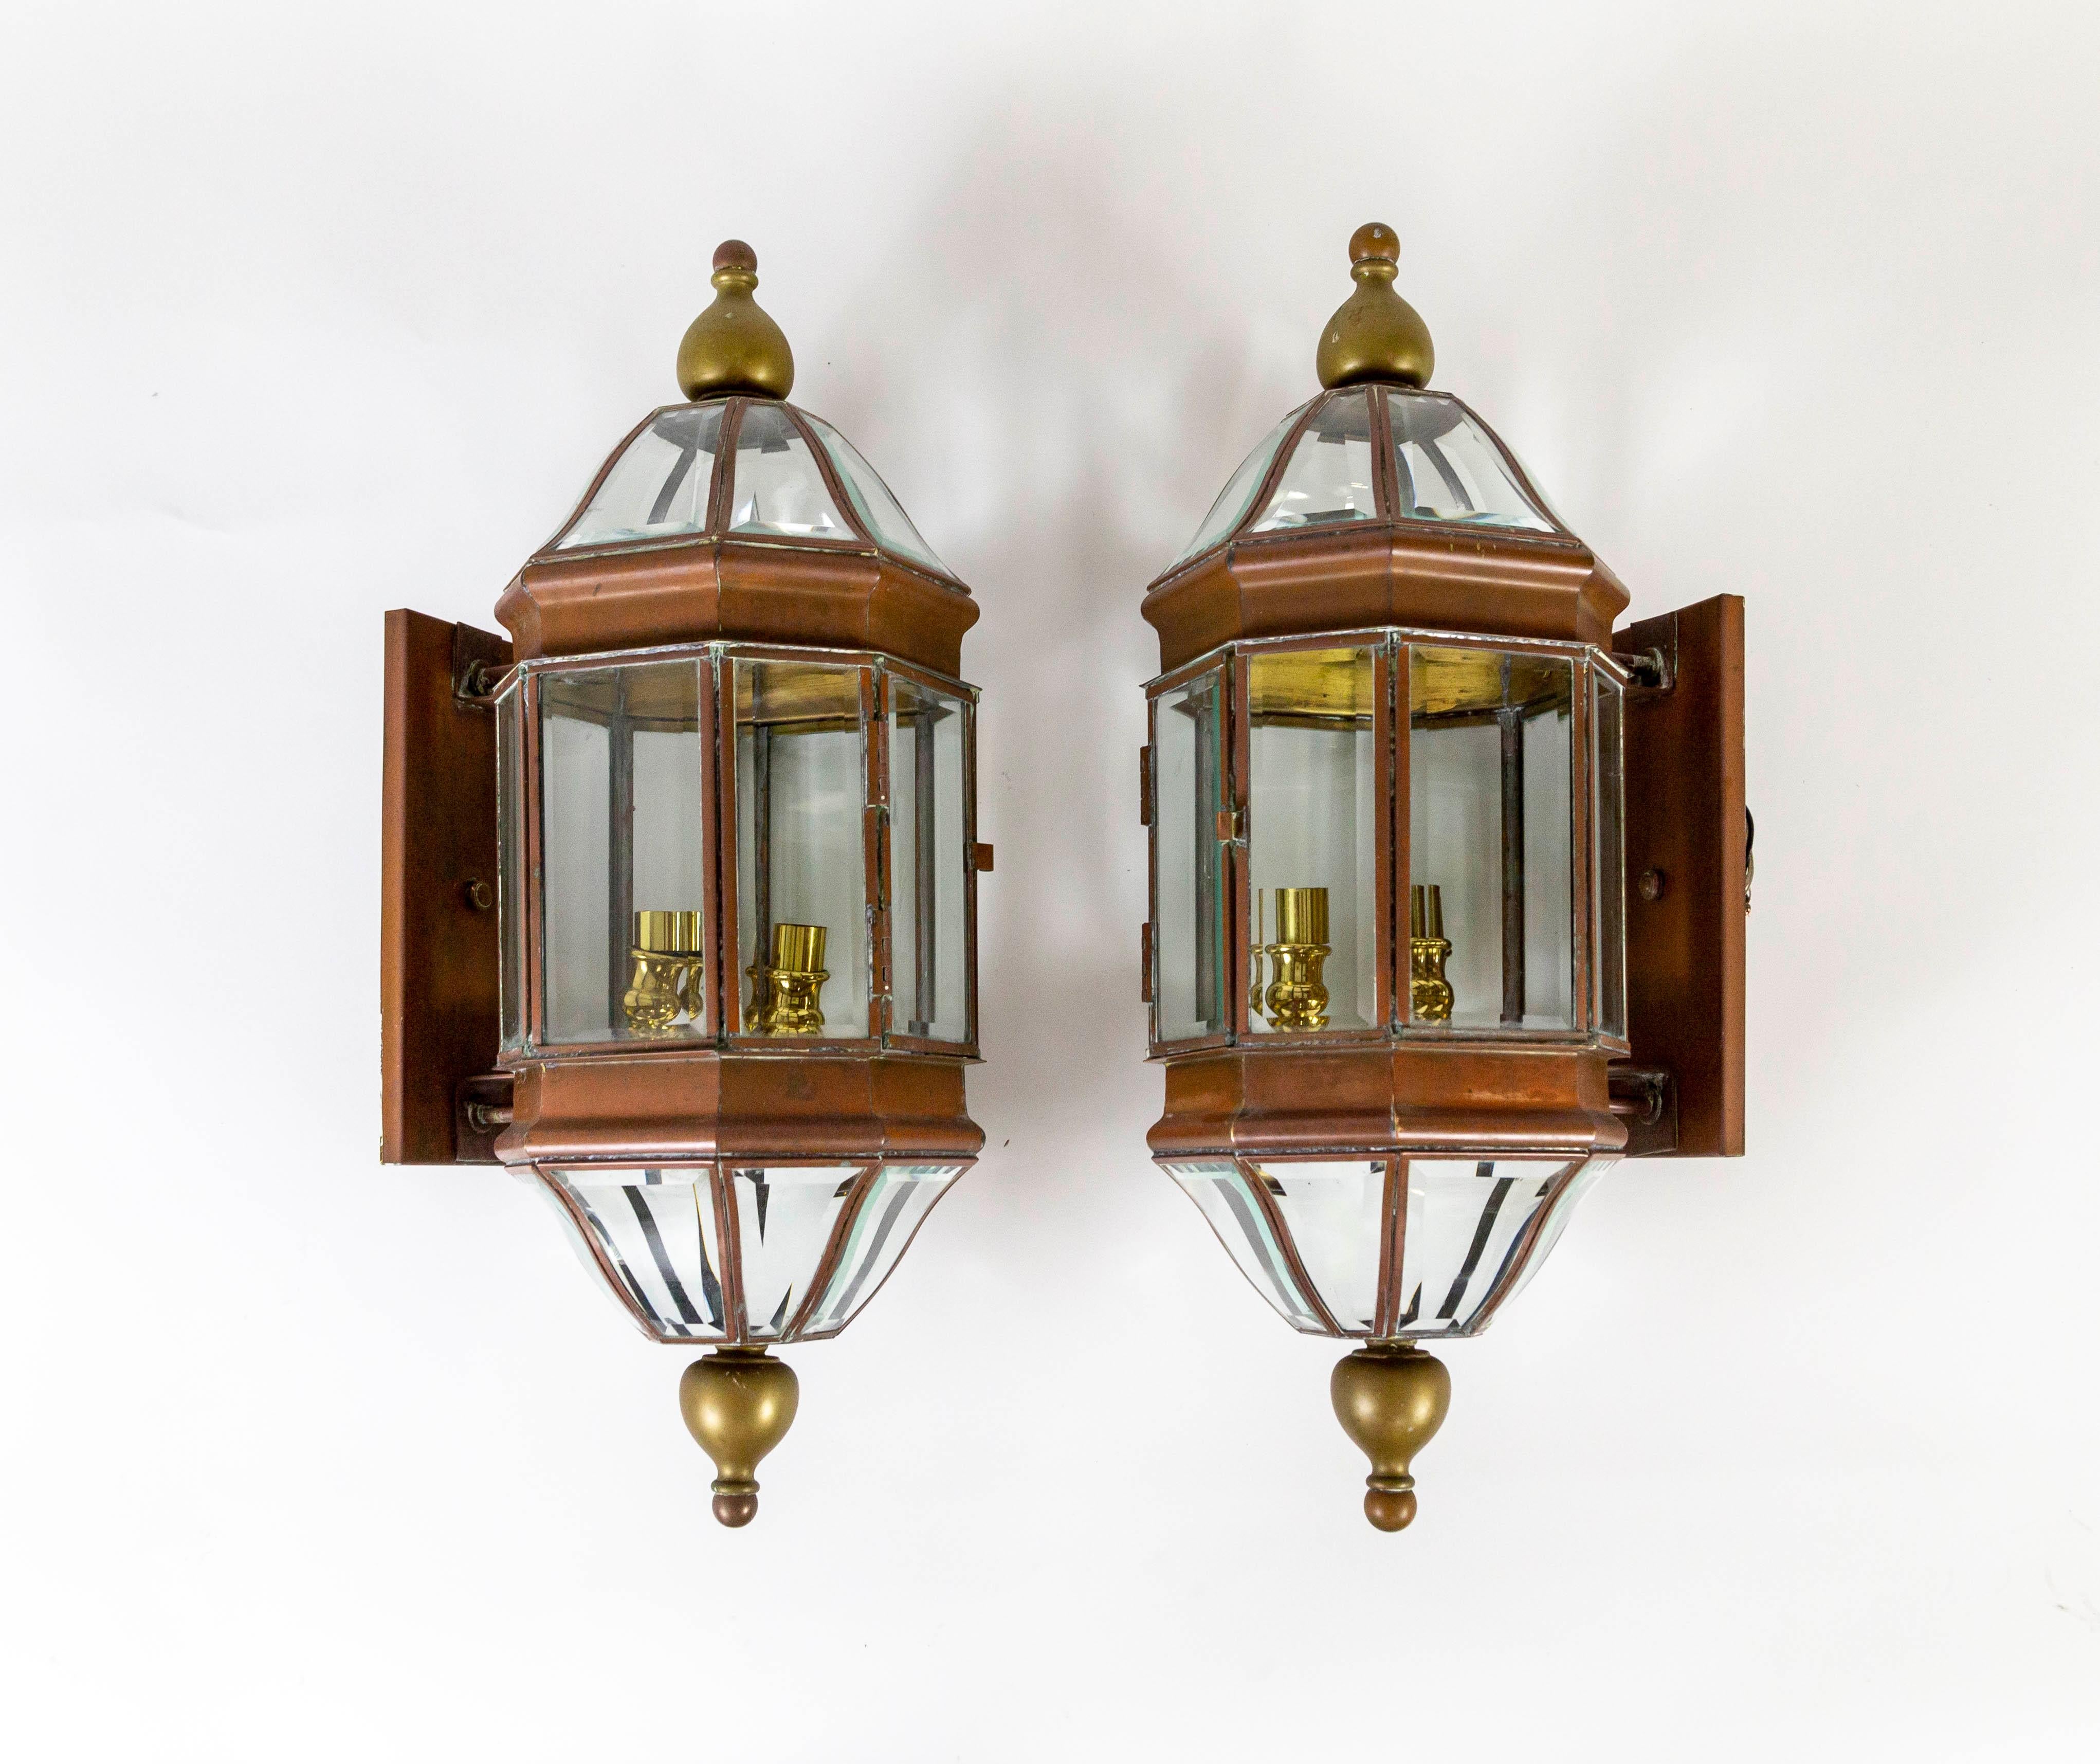 A pair of sizable, 3-candlestick light, copper, and brass lantern sconces in an elongated, octagon shape curving at the top and bottom and finished with finials. The segmented glass panels are beveled, held in a copper frame slightly projected from